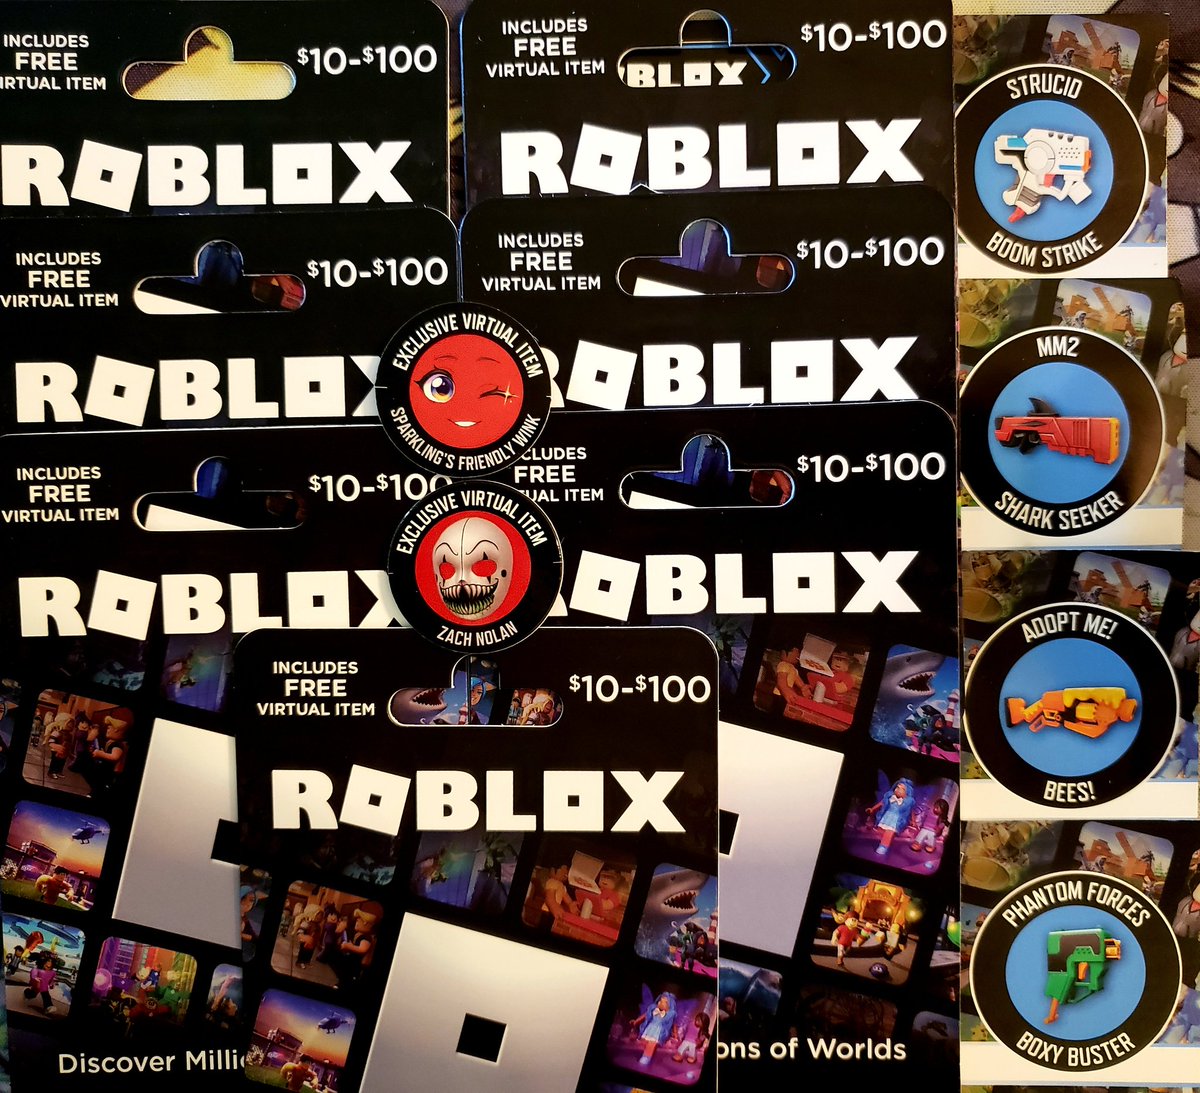 Prime Gaming on X: Unlock two exclusive items for @Roblox for